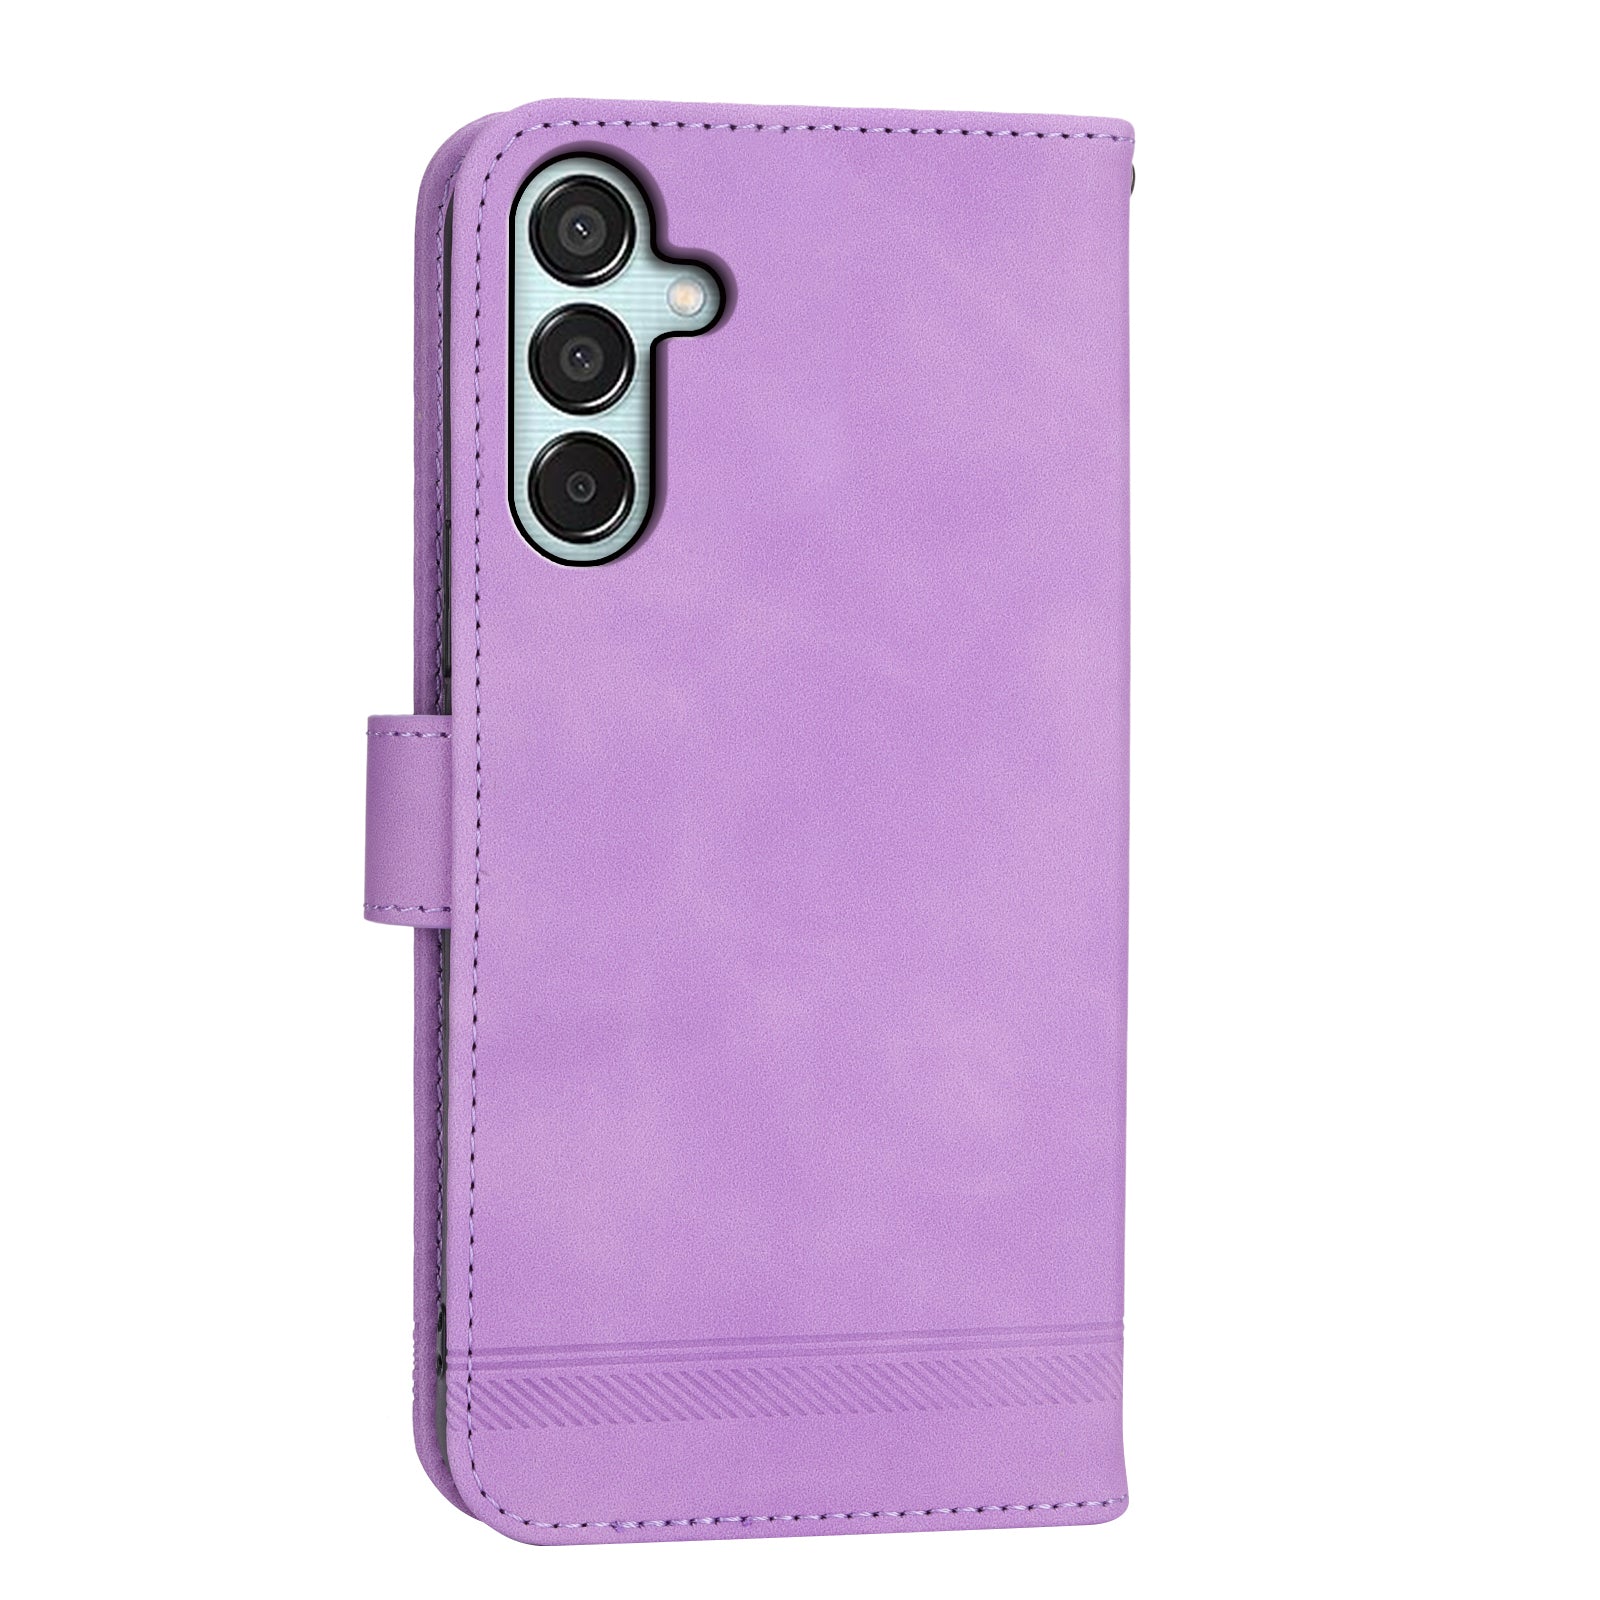 DIERFENG DF-03 Flip Stand Cover for Samsung Galaxy M15 5G / F15 5G Cases Imprinted Card Holder Shell - Purple